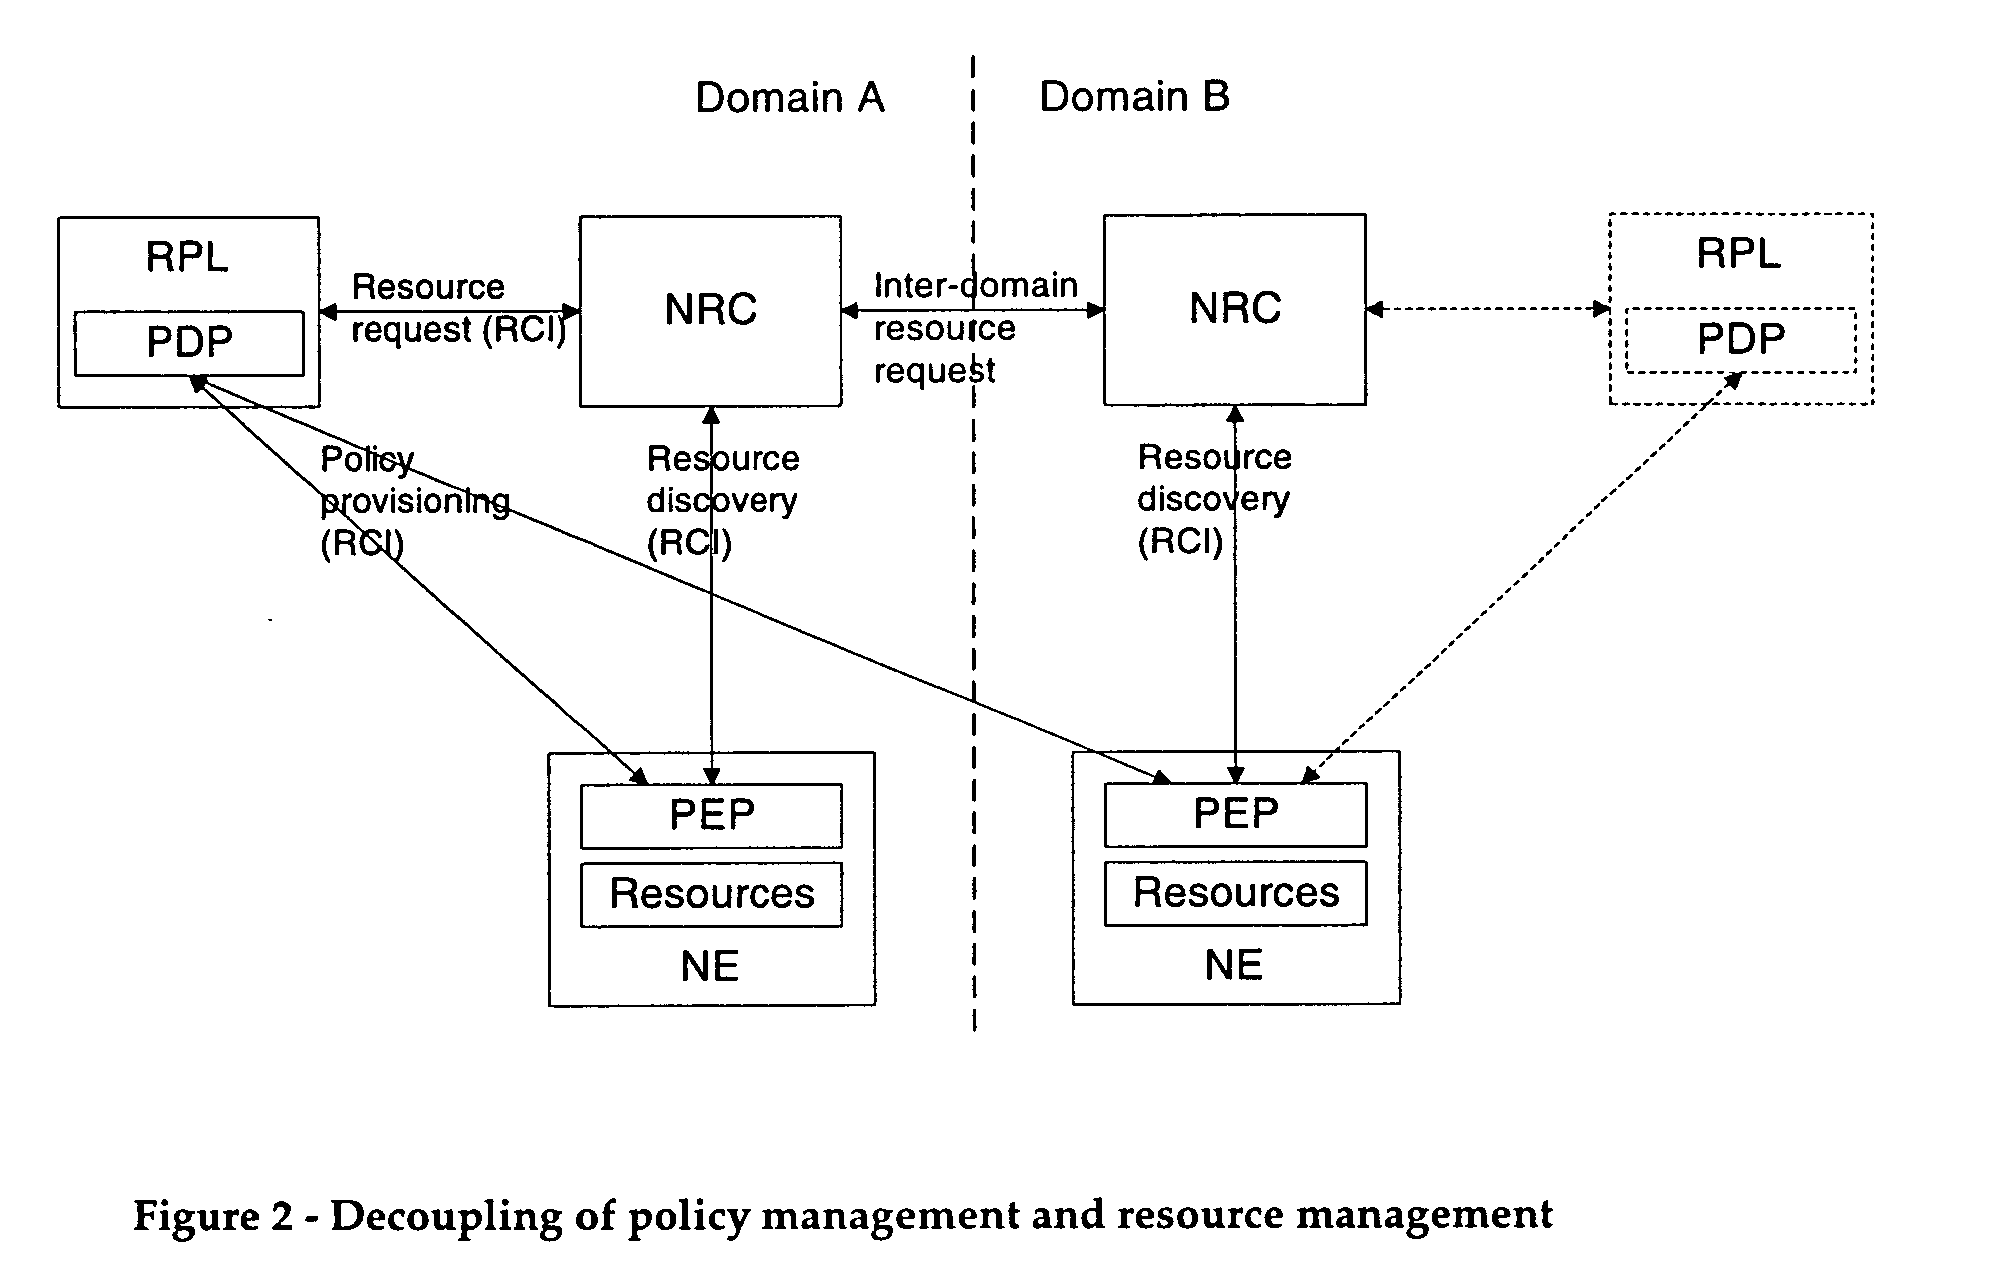 Mechanism to allow dynamic trusted association between PEP partitions and PDPs